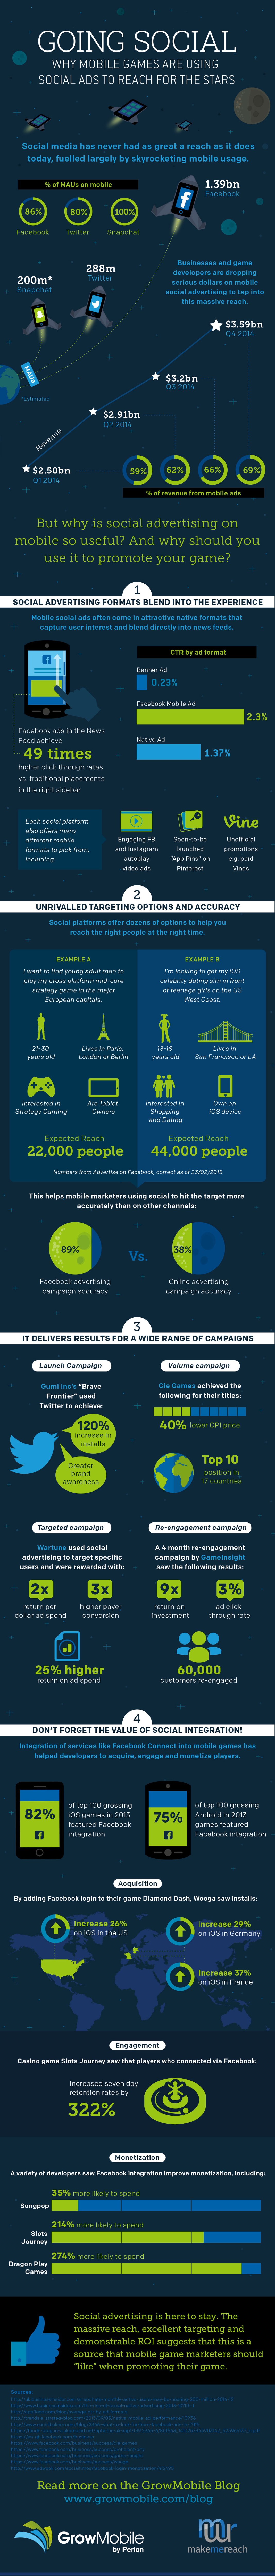 INFOGRAPHIC – GOING SOCIAL